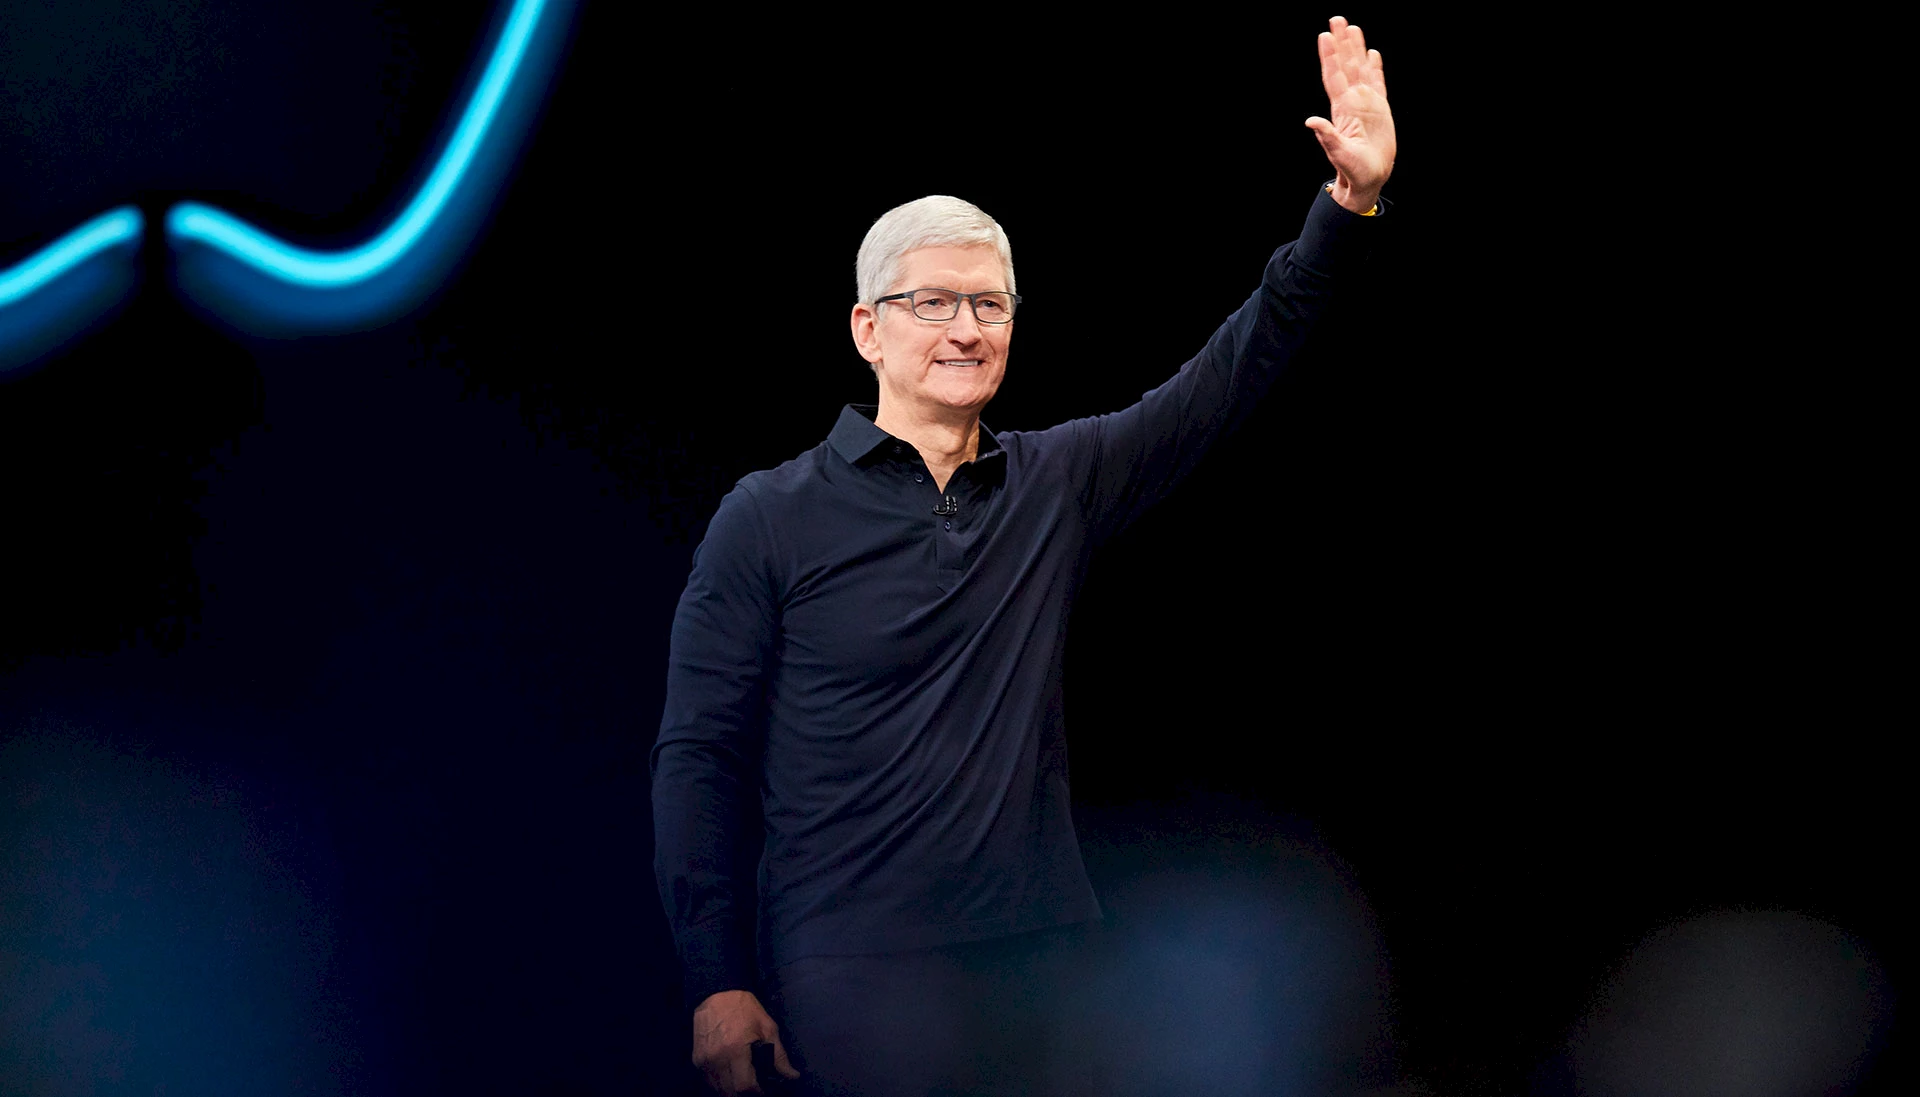 Tim Cook welcomes developers to WWDC 2019.